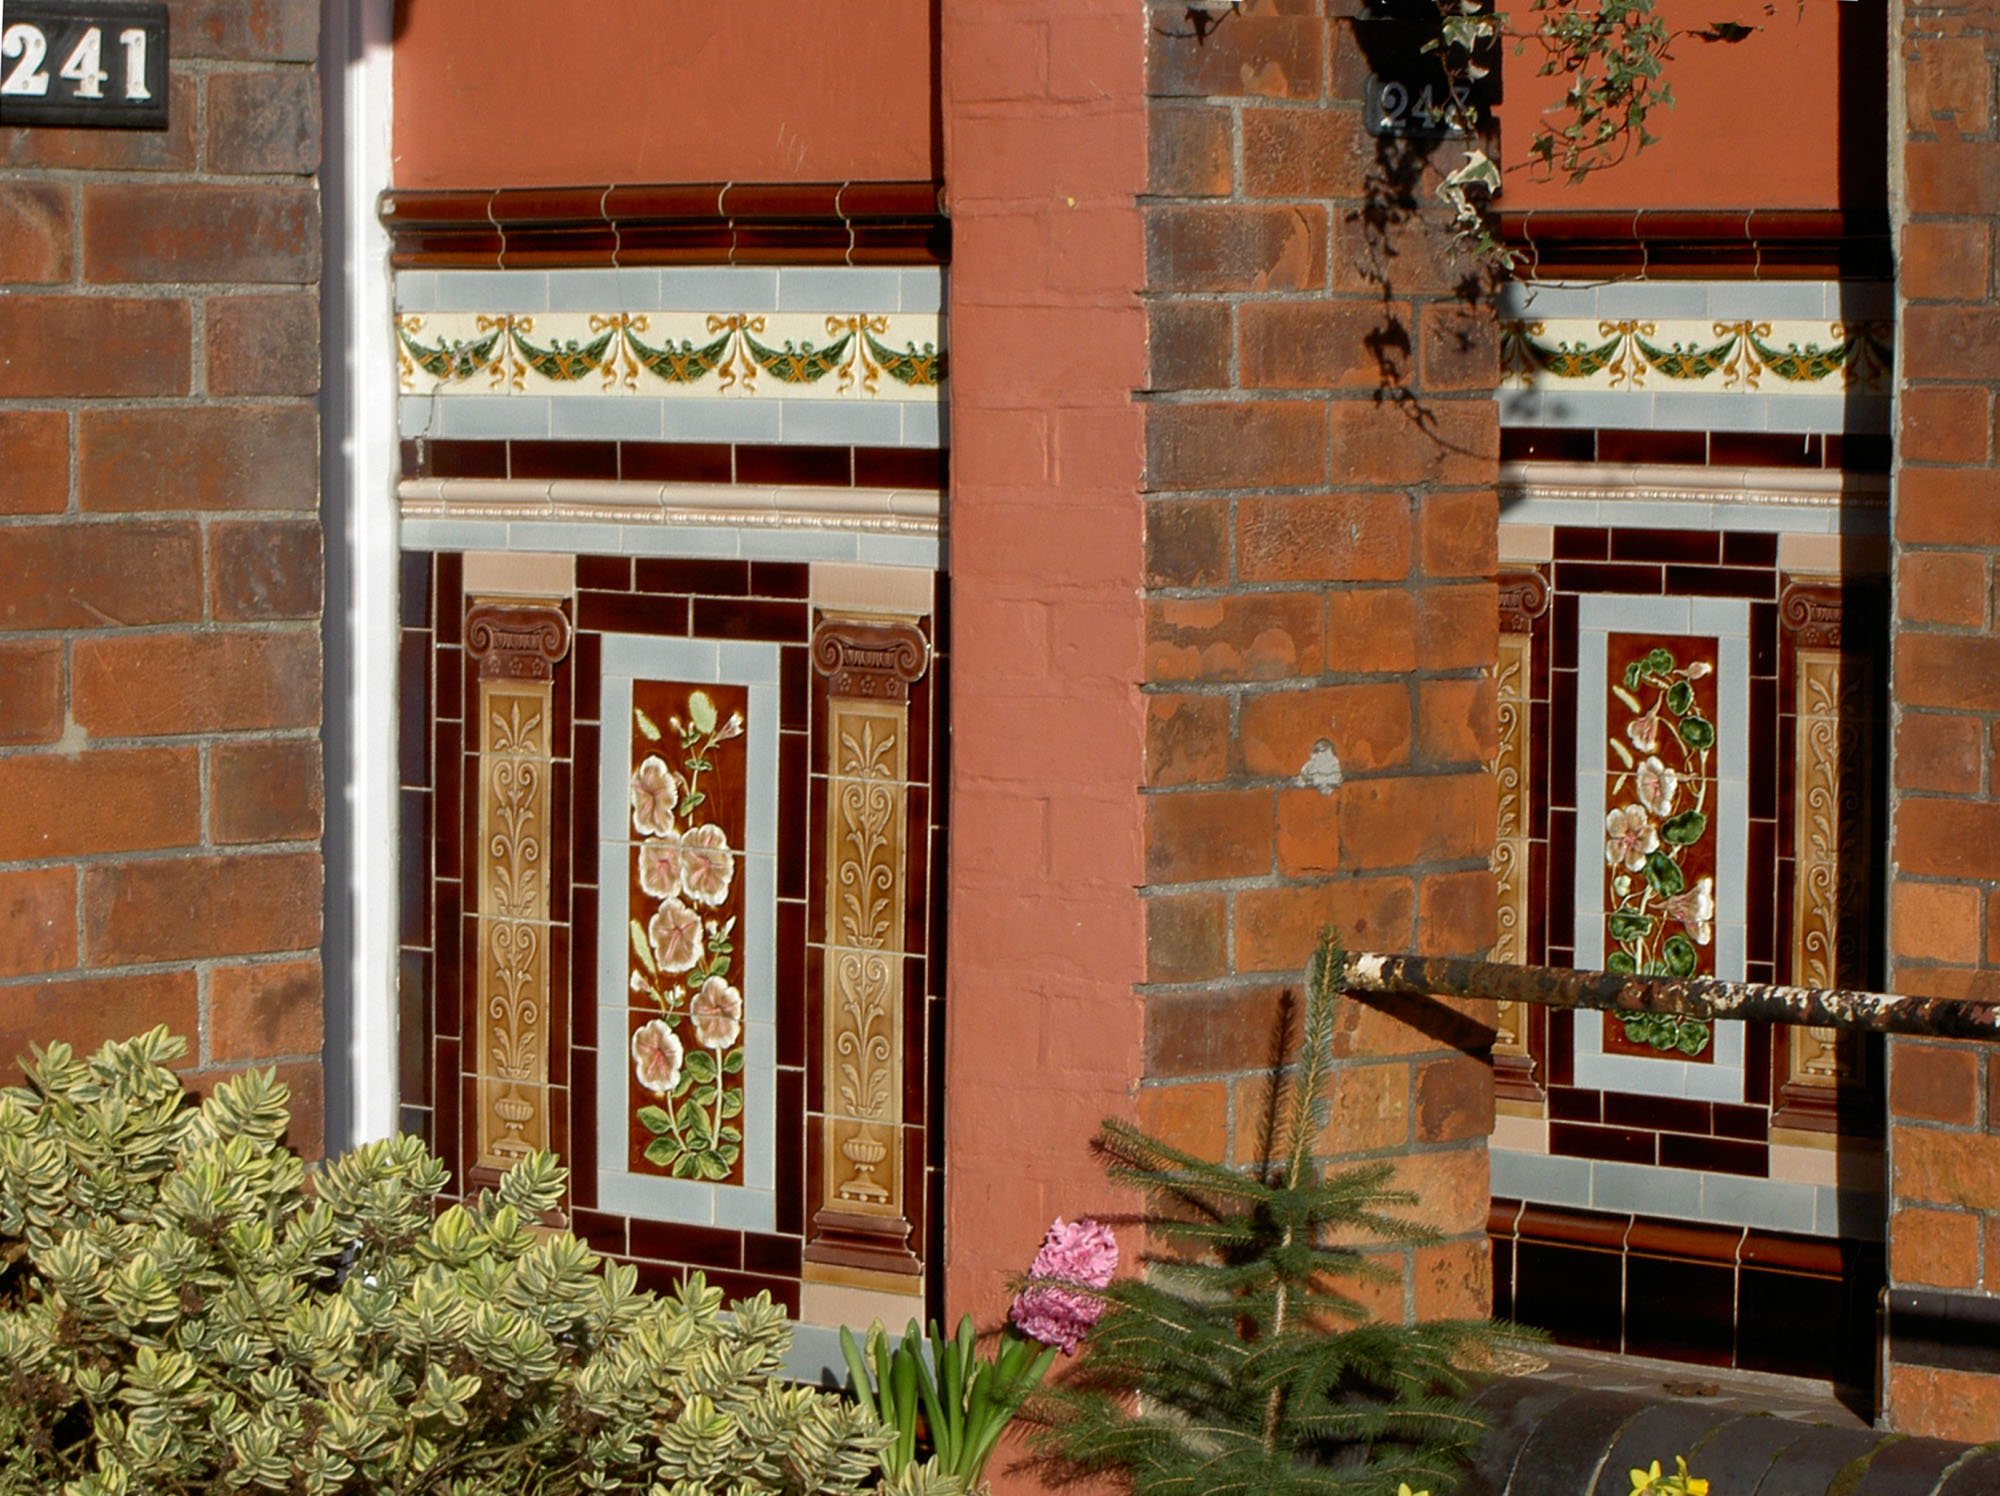 Alternating brick and tiled surfaces with garden plants in foreground.